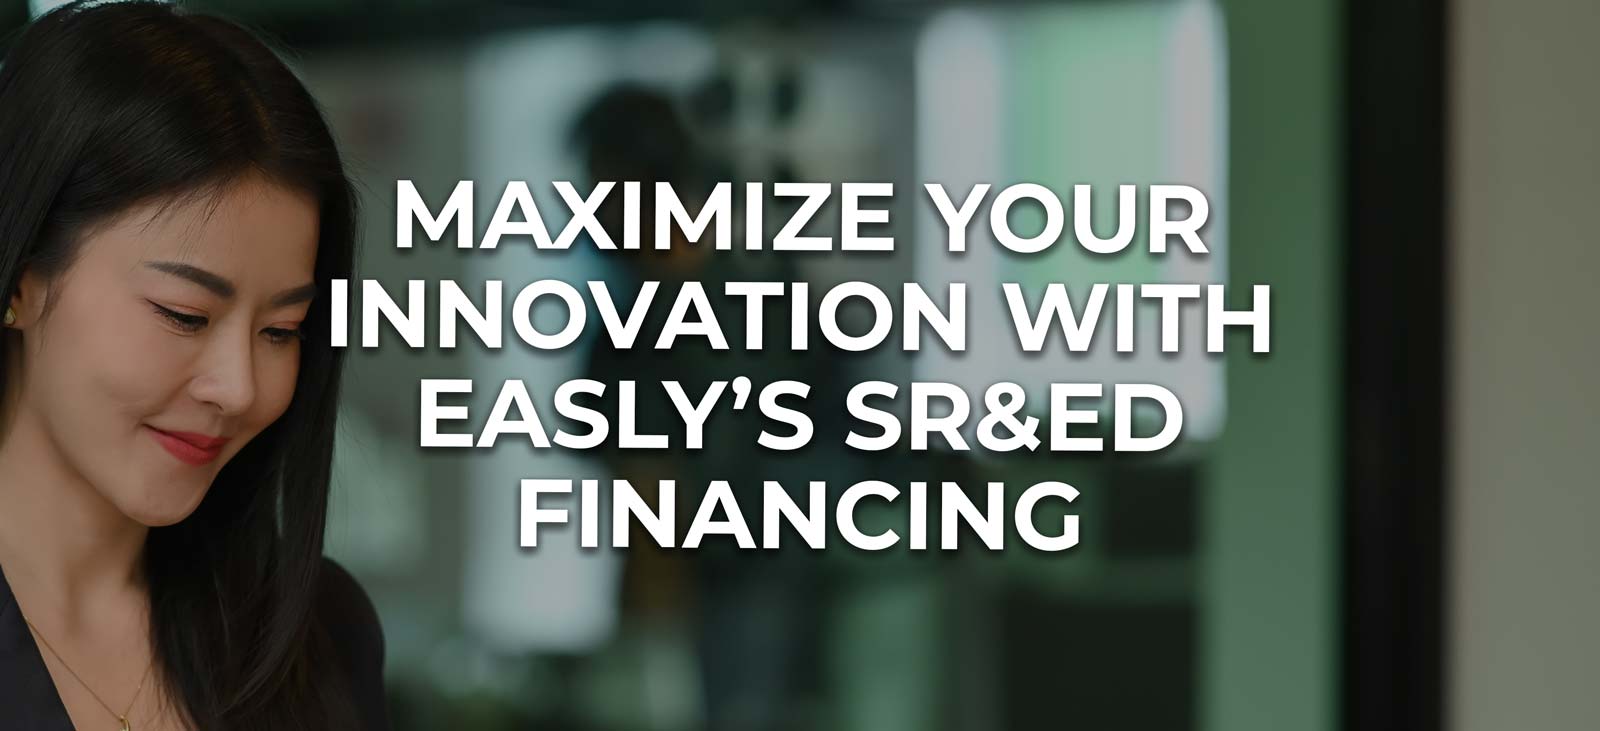 maximize your innovation cra sr&ed financing through easly